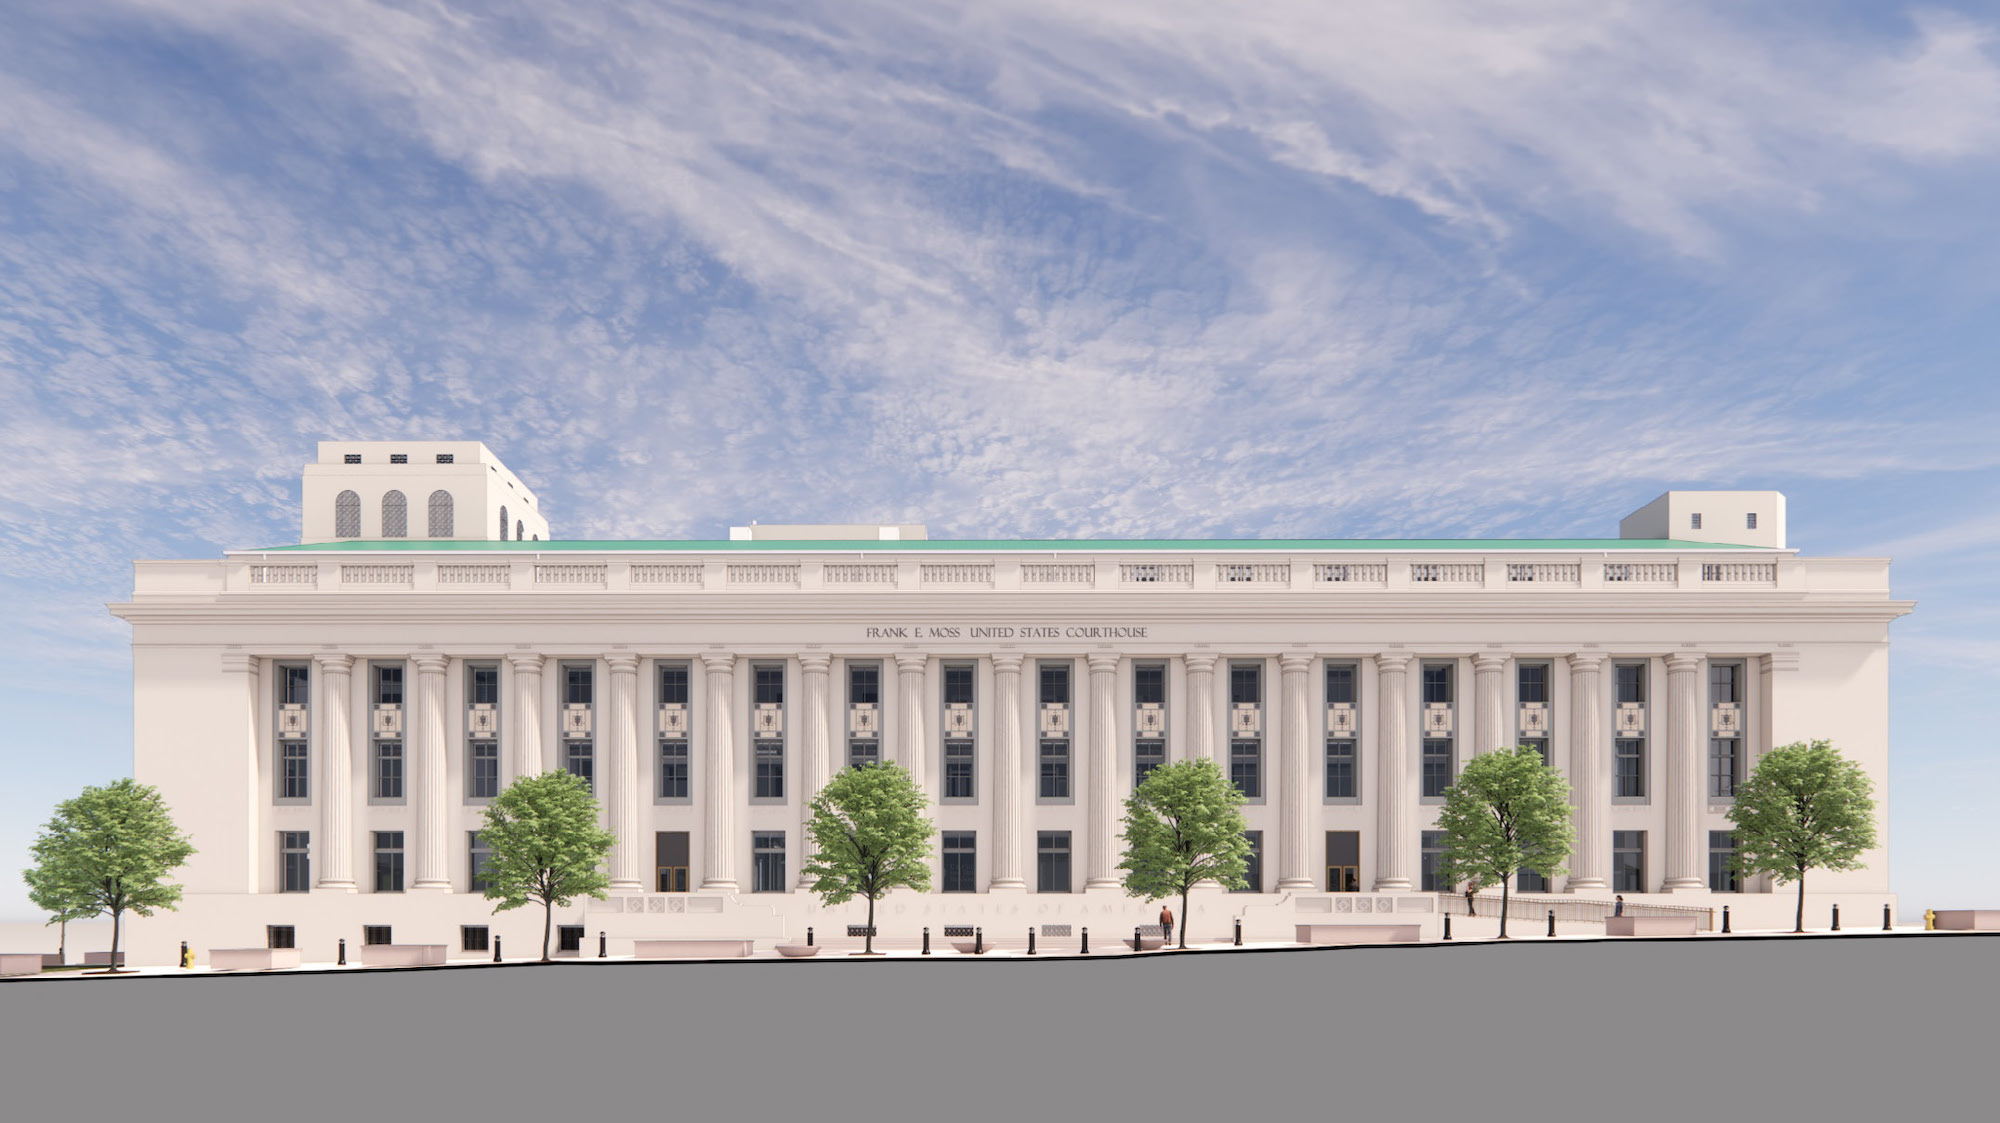 Salt Lake City’s Frank E. Moss U.S. Courthouse will transform into a modern workplace for federal agencies